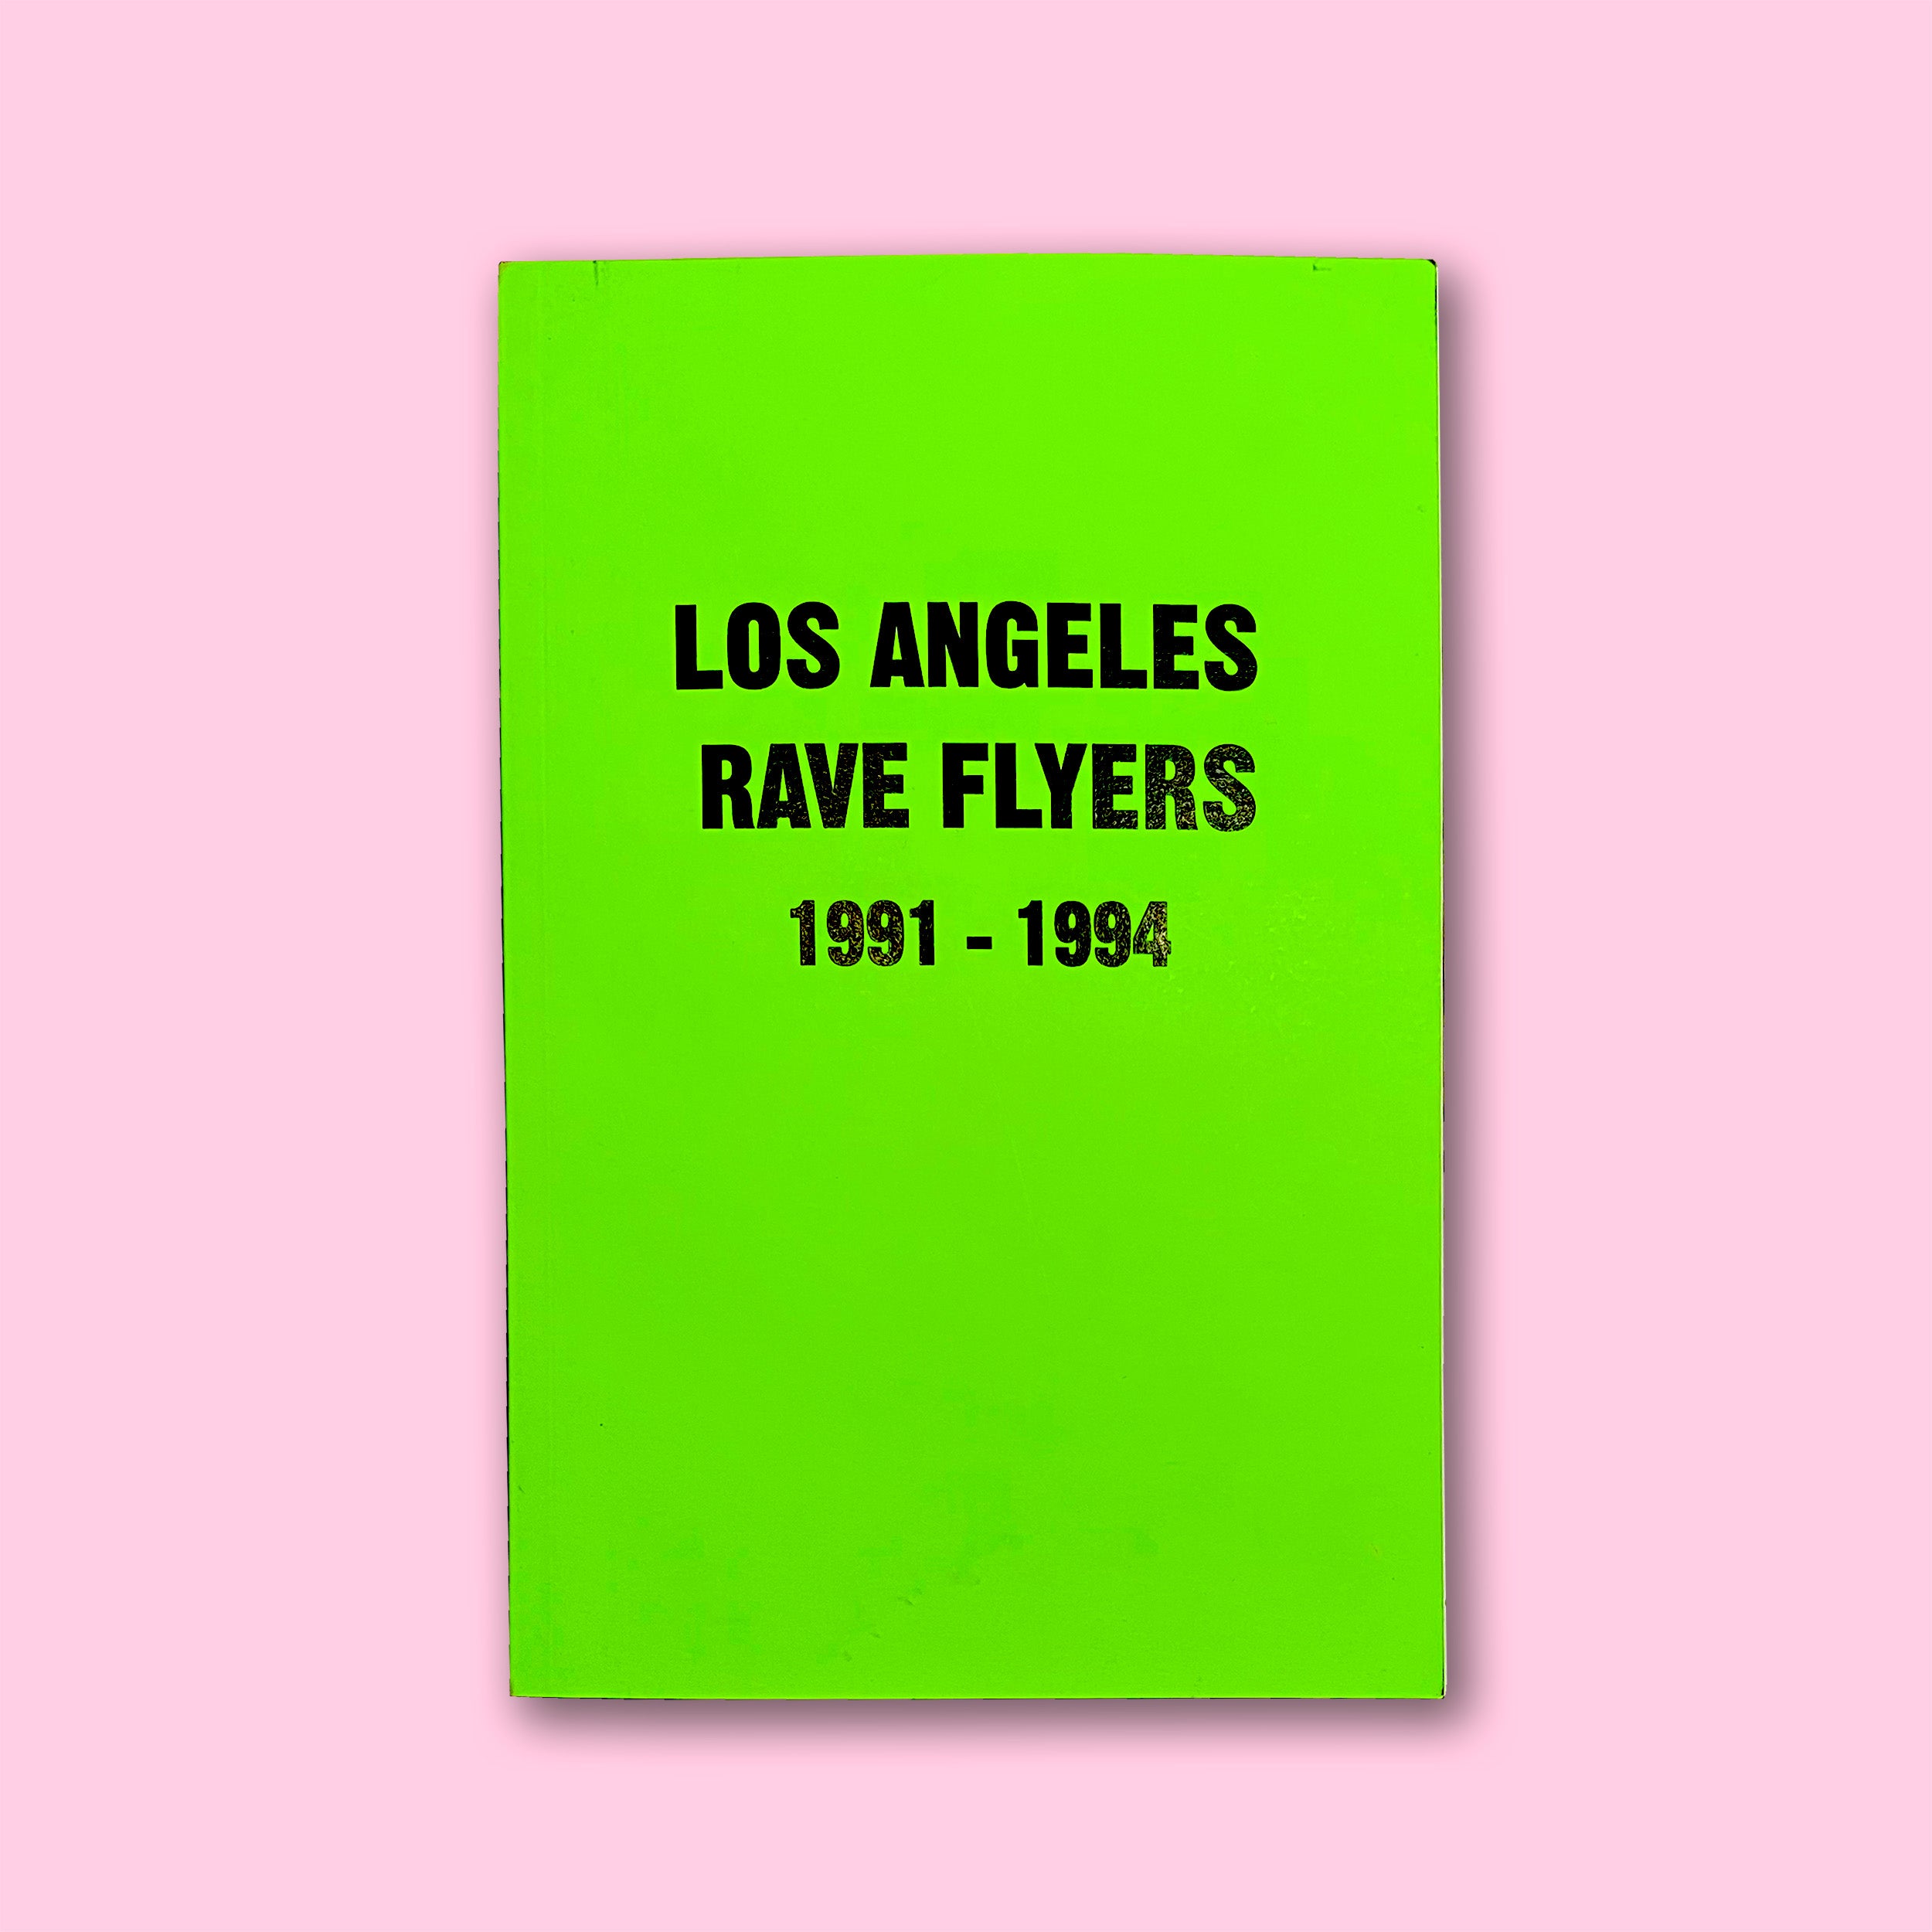 LOS ANGELES RAVE FLYERS 1991 - 1994 BY COLPA PRESS